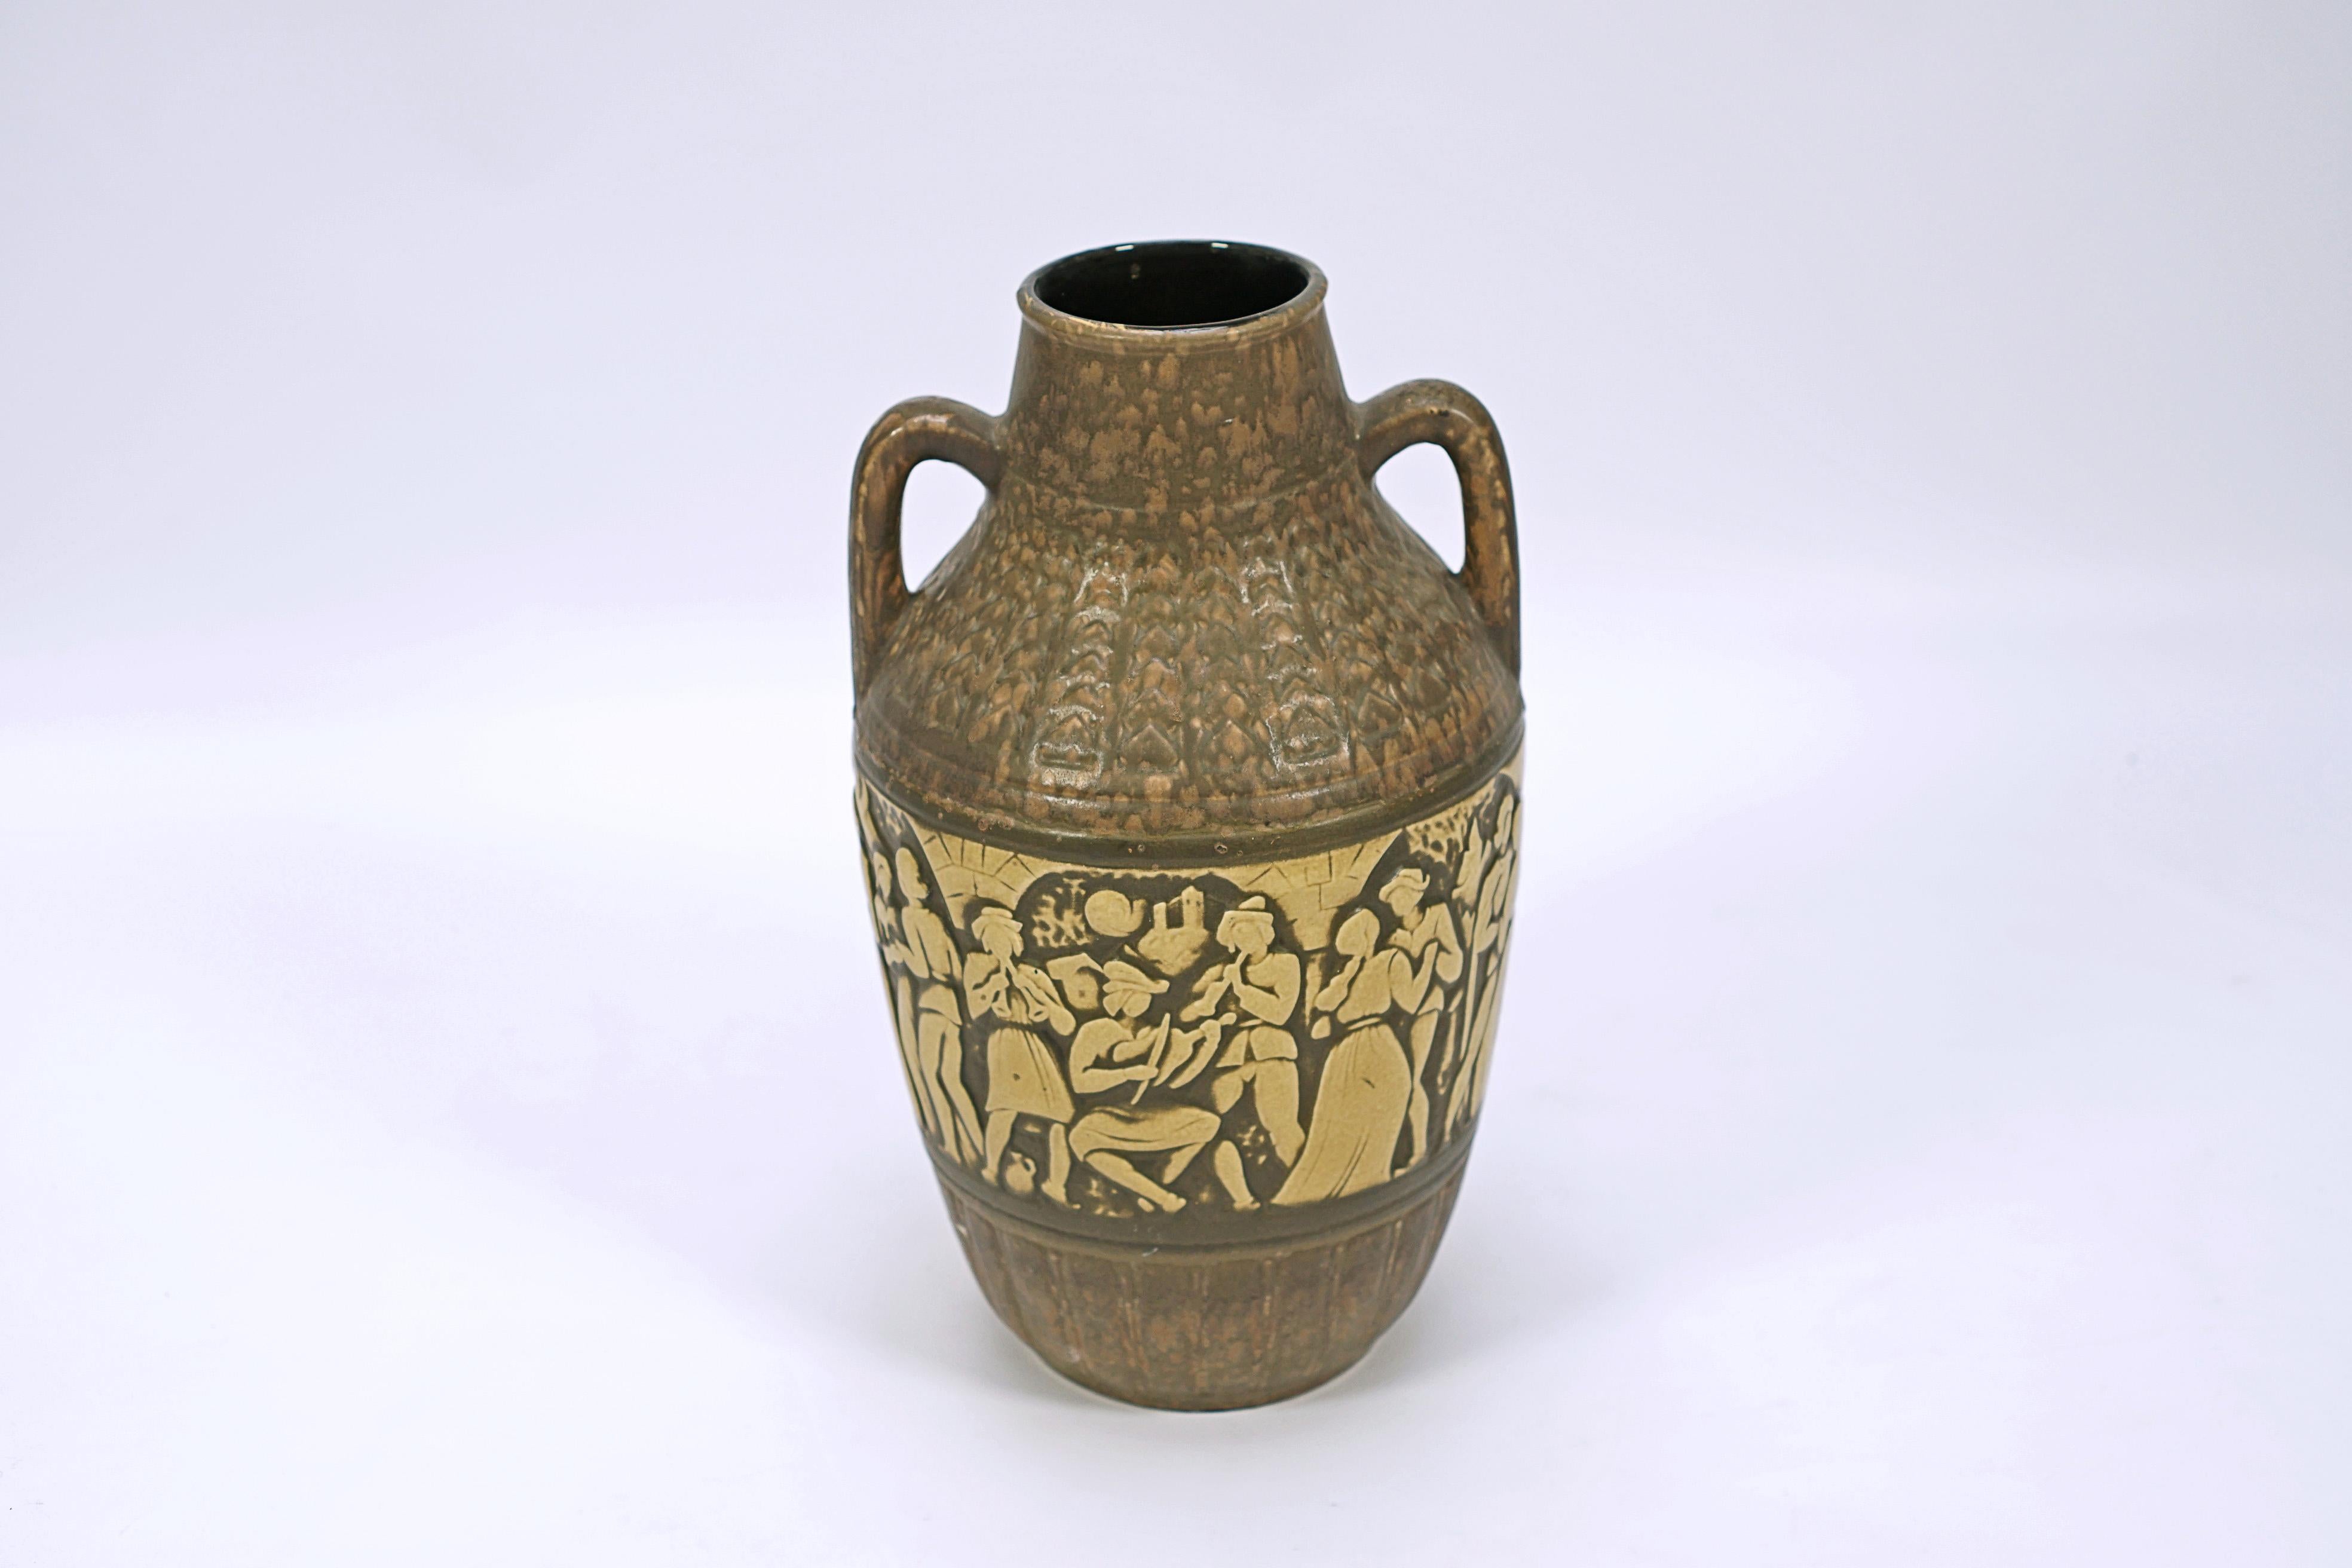 Ceramic vase in brown tones with handles, with a center of characters in a German party of the time.

Signed W. Germany, No. 224157. (Post-war West Germany).